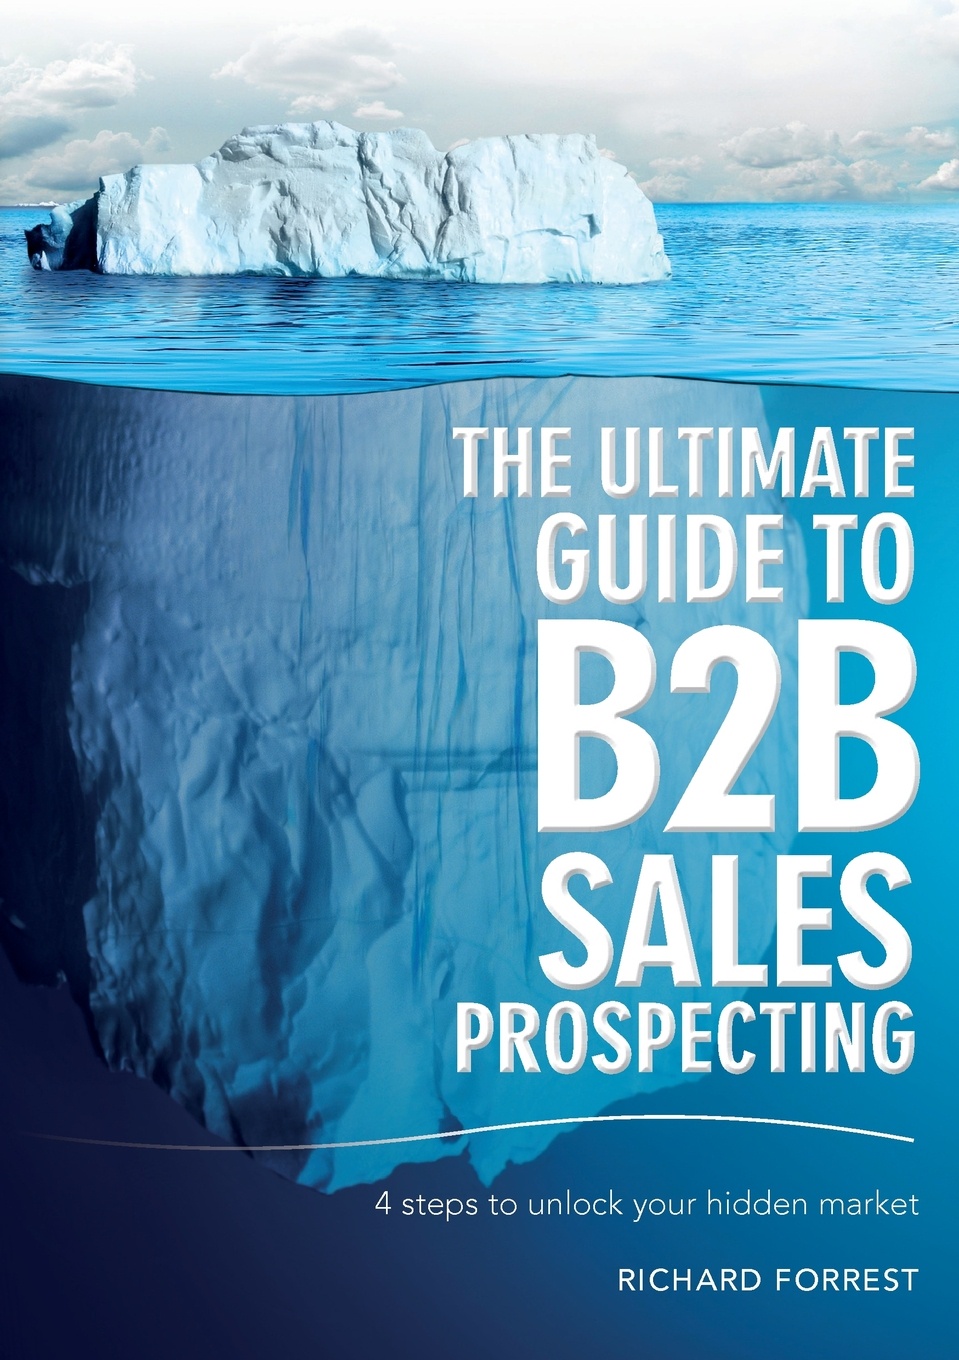 The Ultimate Guide to B2B Sales Prospecting. 4 steps to unlock your hidden market